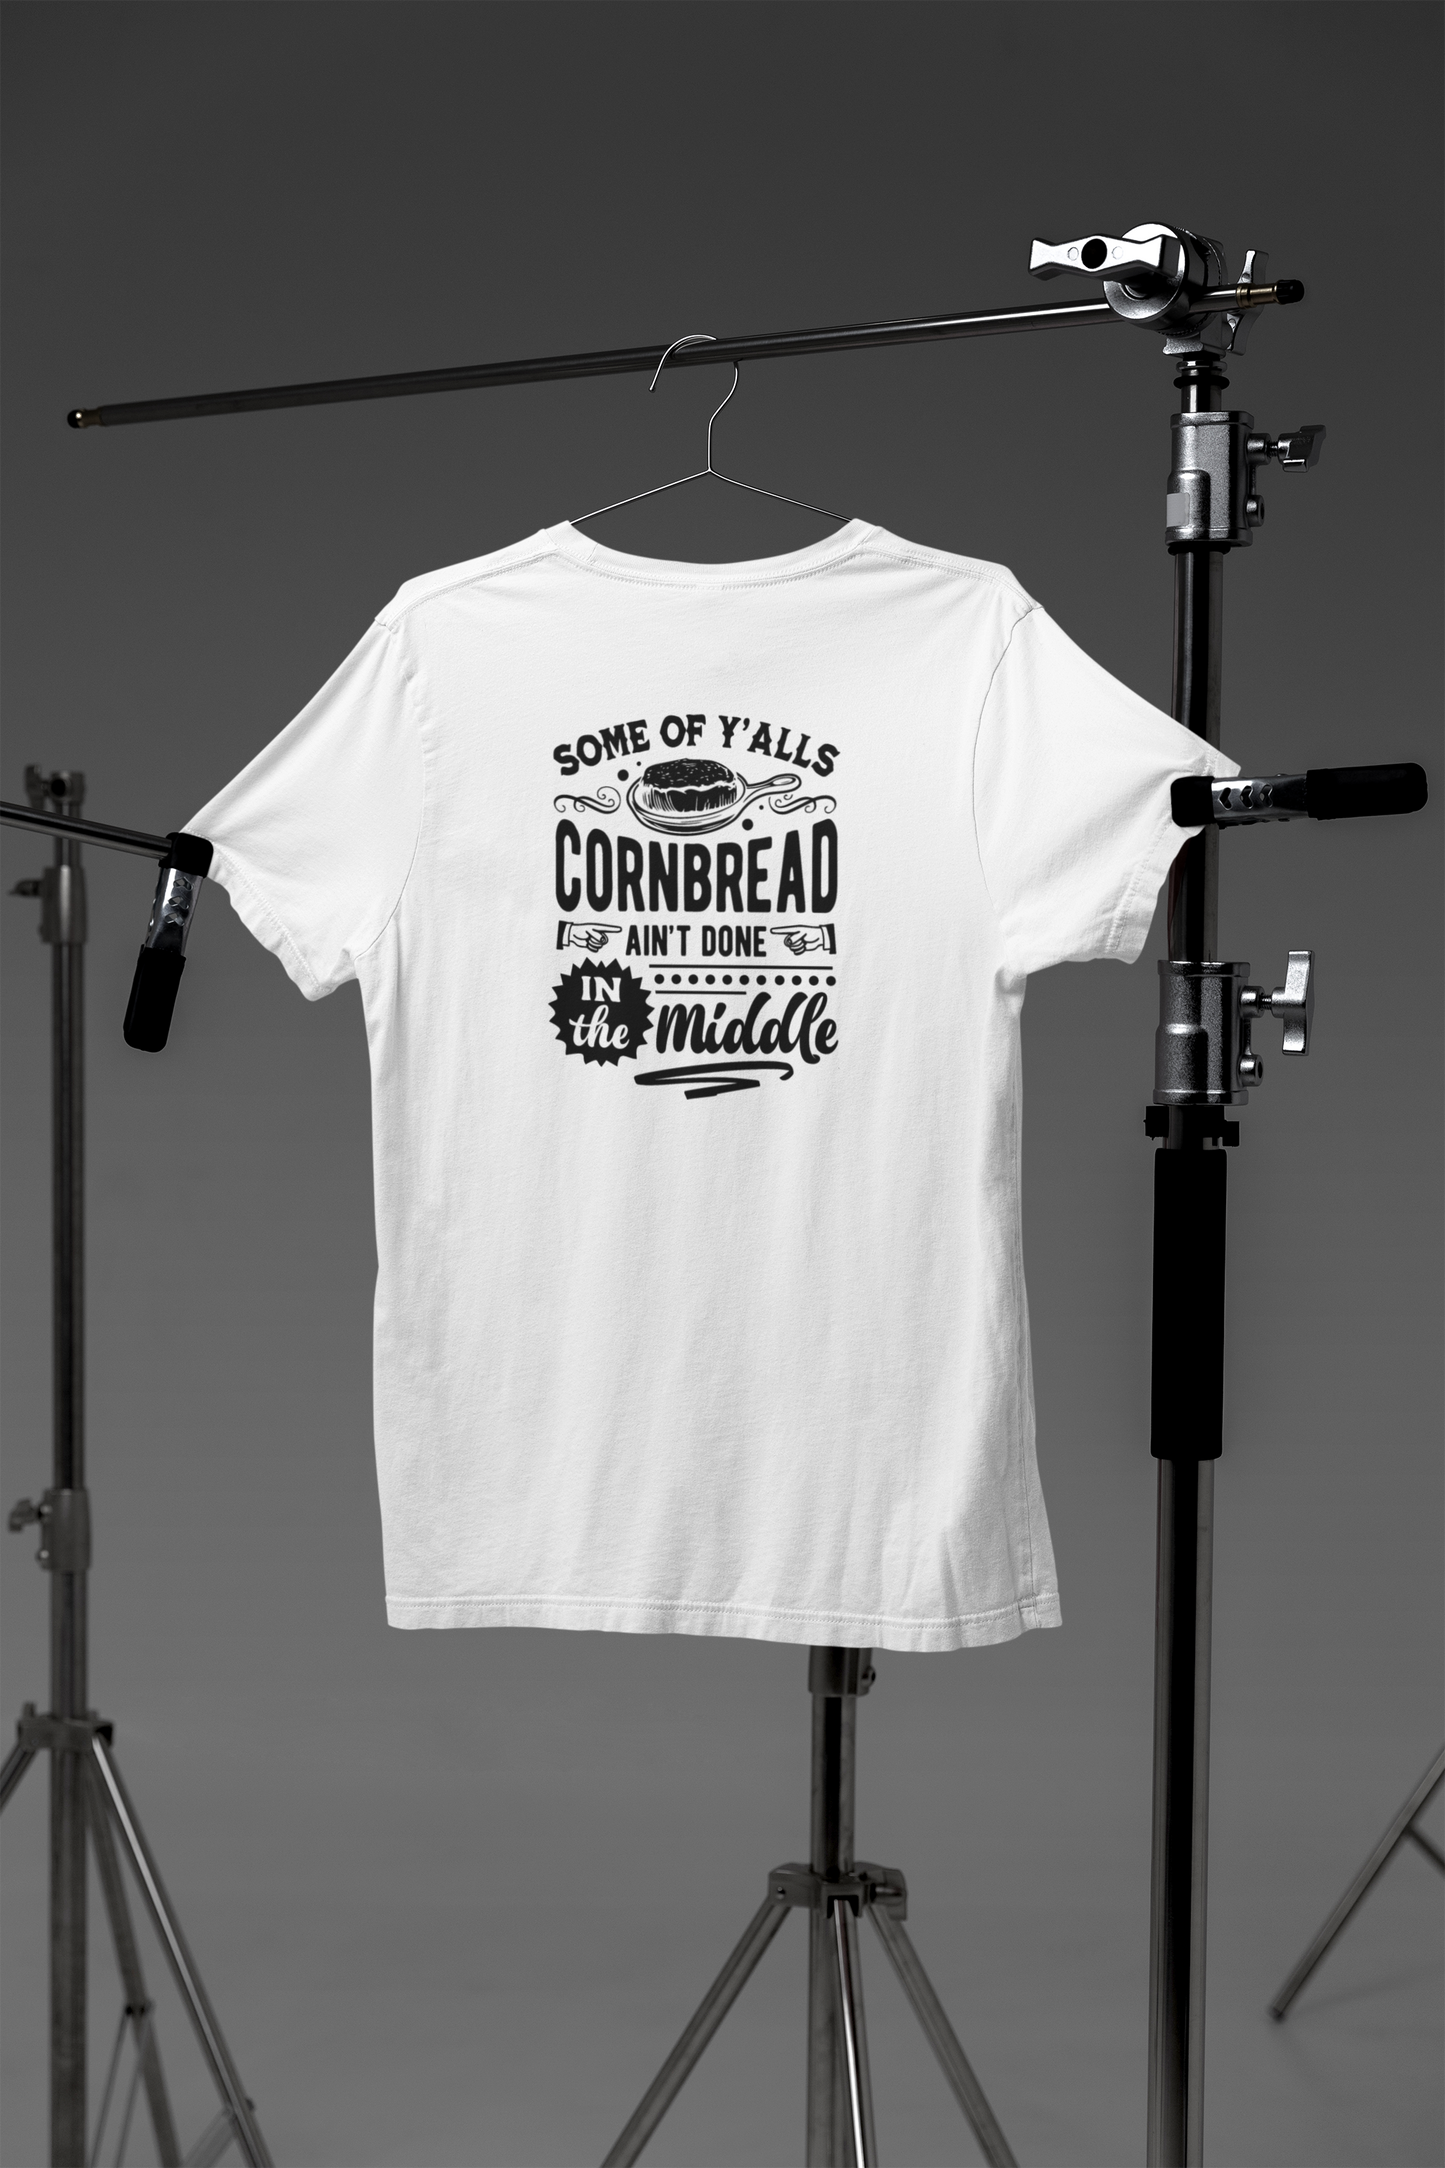 Some Of Y'alls Cornbread Aint Done In The Middle Crew Neck T-Shirt